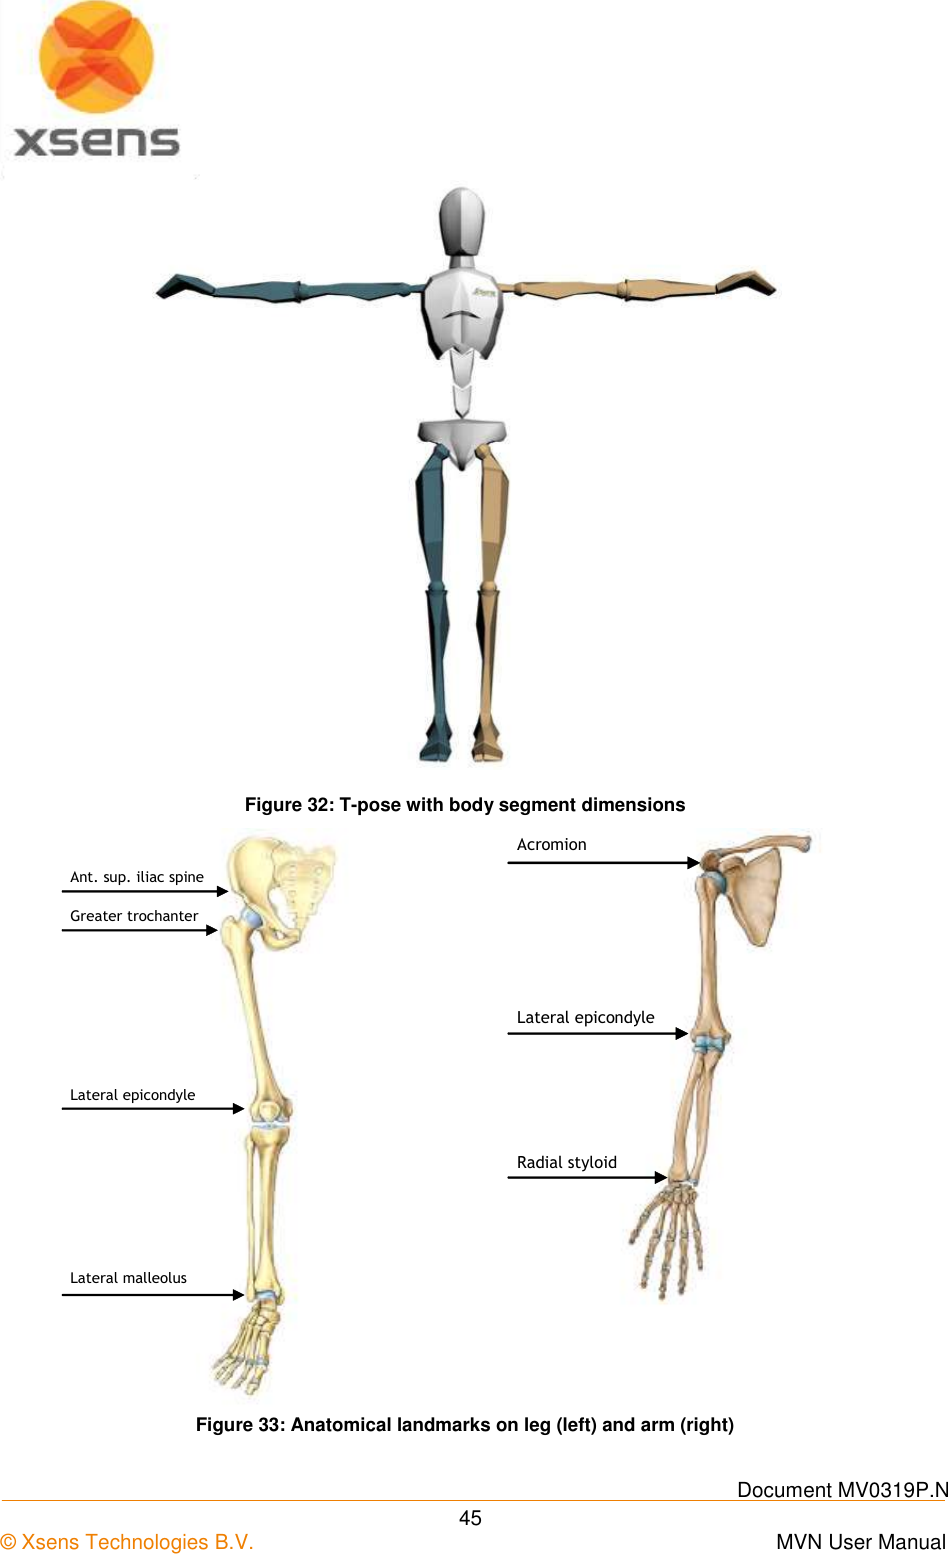    Document MV0319P.N © Xsens Technologies B.V.      MVN User Manual  45  Figure 32: T-pose with body segment dimensions    Figure 33: Anatomical landmarks on leg (left) and arm (right)  Greater trochanter Lateral epicondyle Lateral malleolus  Ant. sup. iliac spine  Lateral epicondyle Radial styloid Acromion 